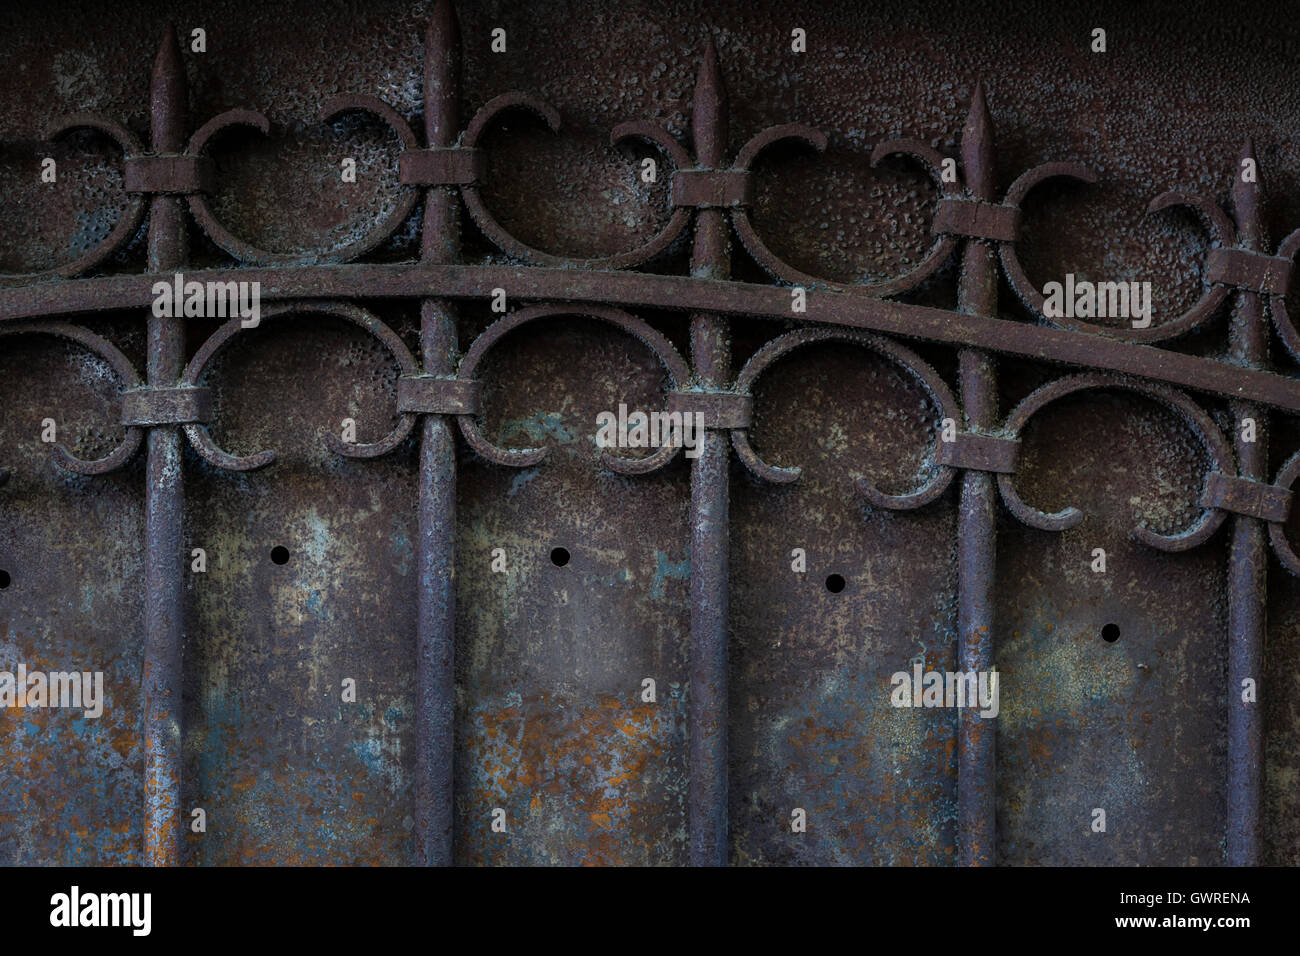 Fragment of old metal gate with ornate wrought iron grid. Toulouse, France. Stock Photo